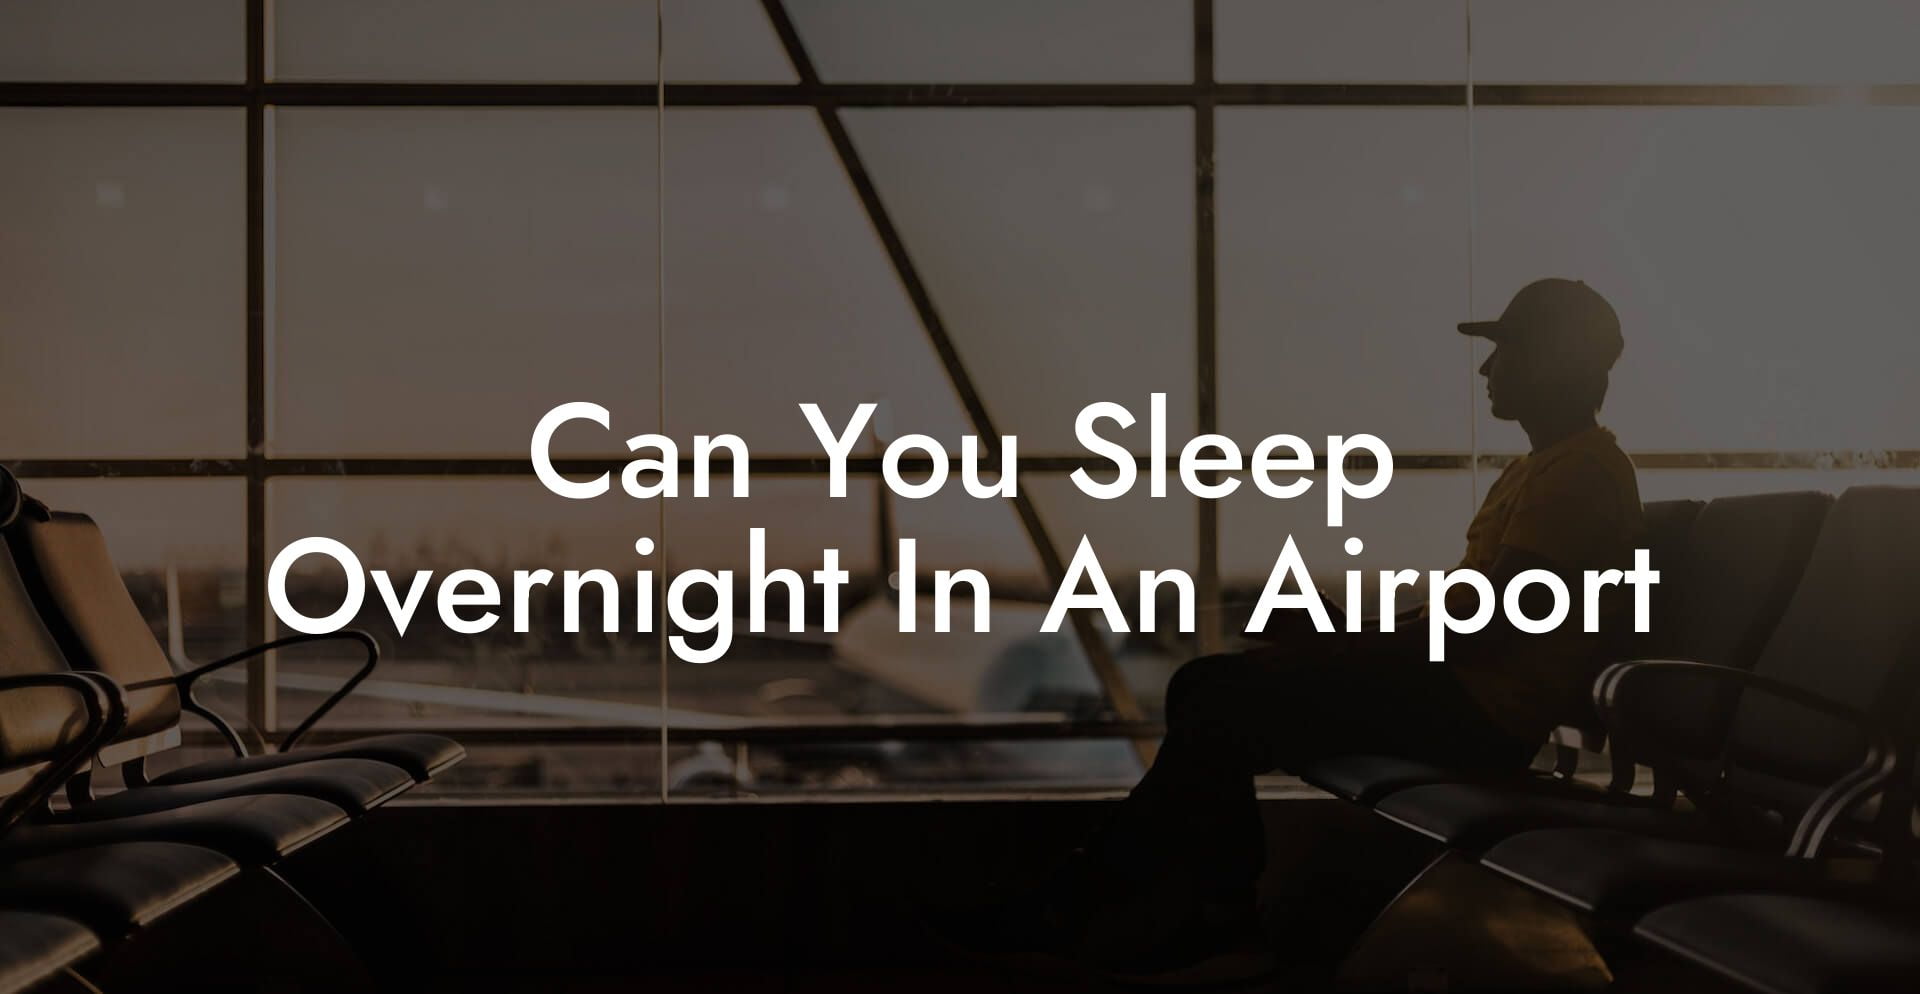 Can You Sleep Overnight In An Airport